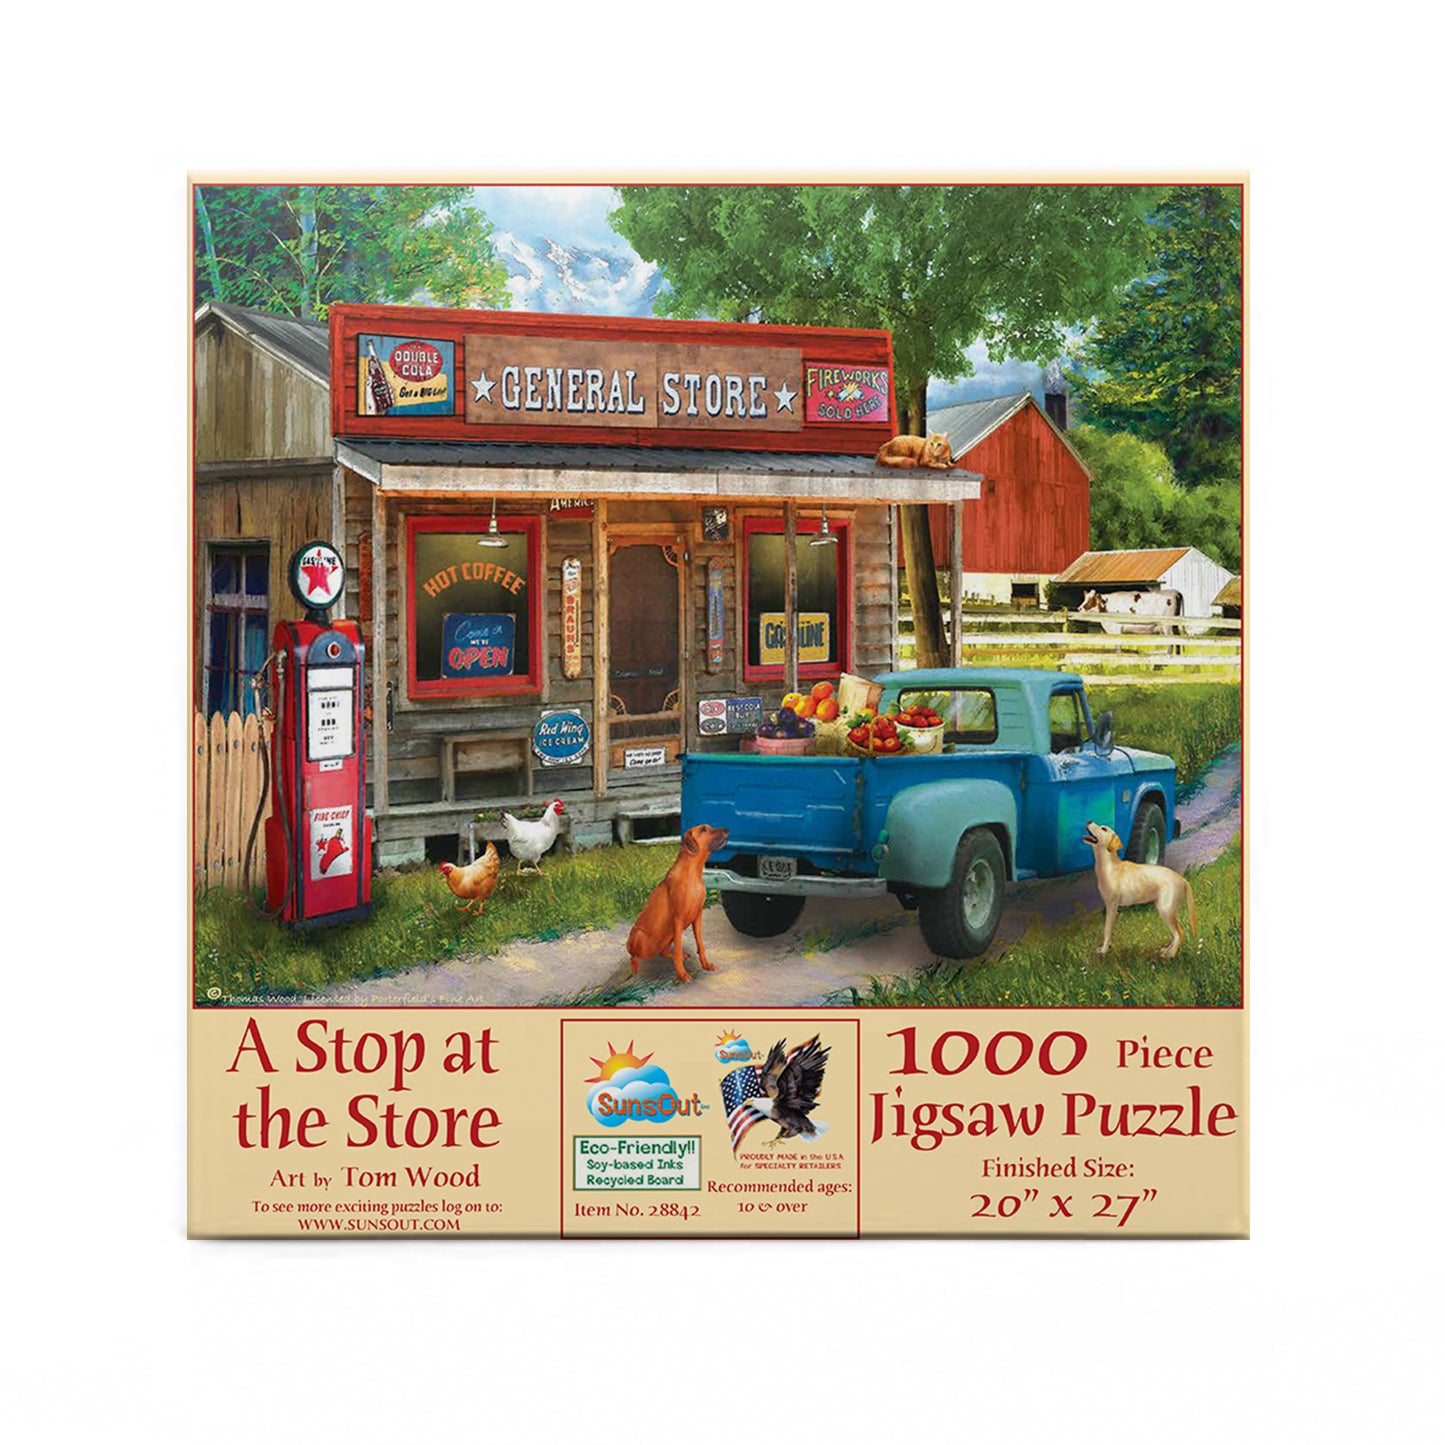 A Stop at the Store - 1000 Piece Jigsaw Puzzle